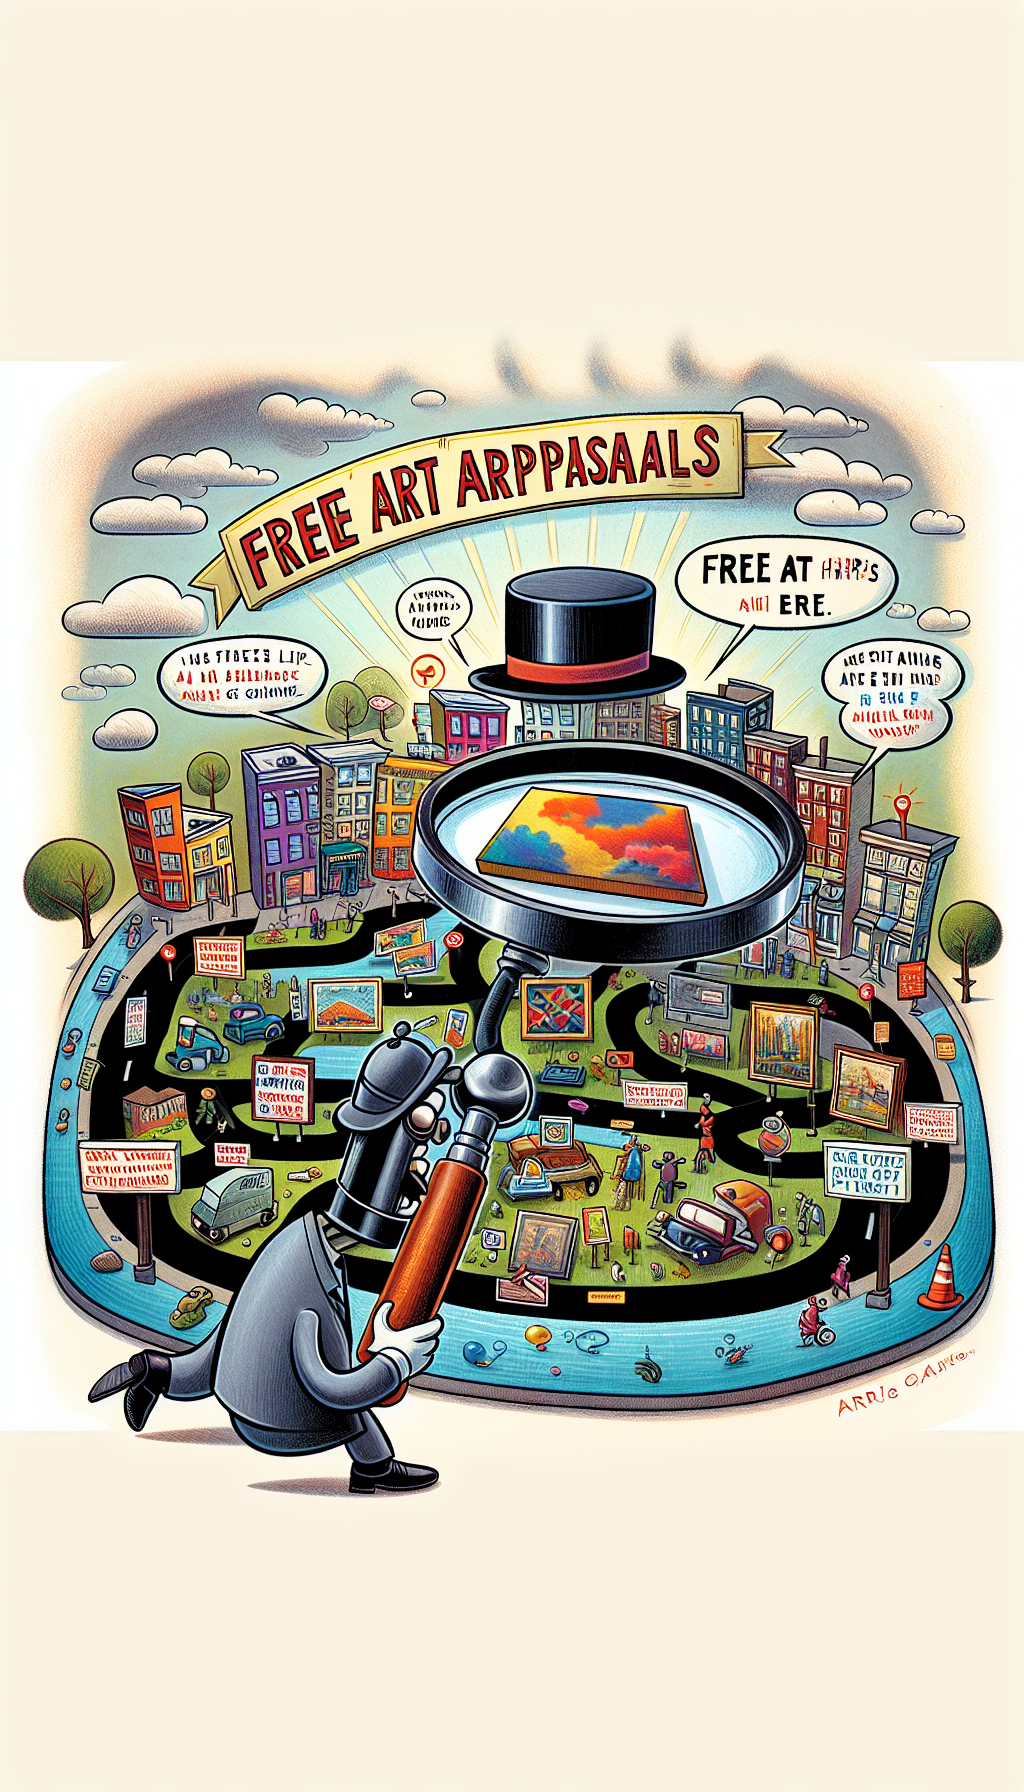 A whimsical caricature map pinpoints various art-related icons around a bustling town while a charismatic magnifying glass sporting a detective hat peers closely at a bright, price-tagged painting. Above, a speech bubble declares “Free Art Appraisals Here!” with a trail leading to inviting, open doors of local galleries, each with a unique façade representing diverse art styles.